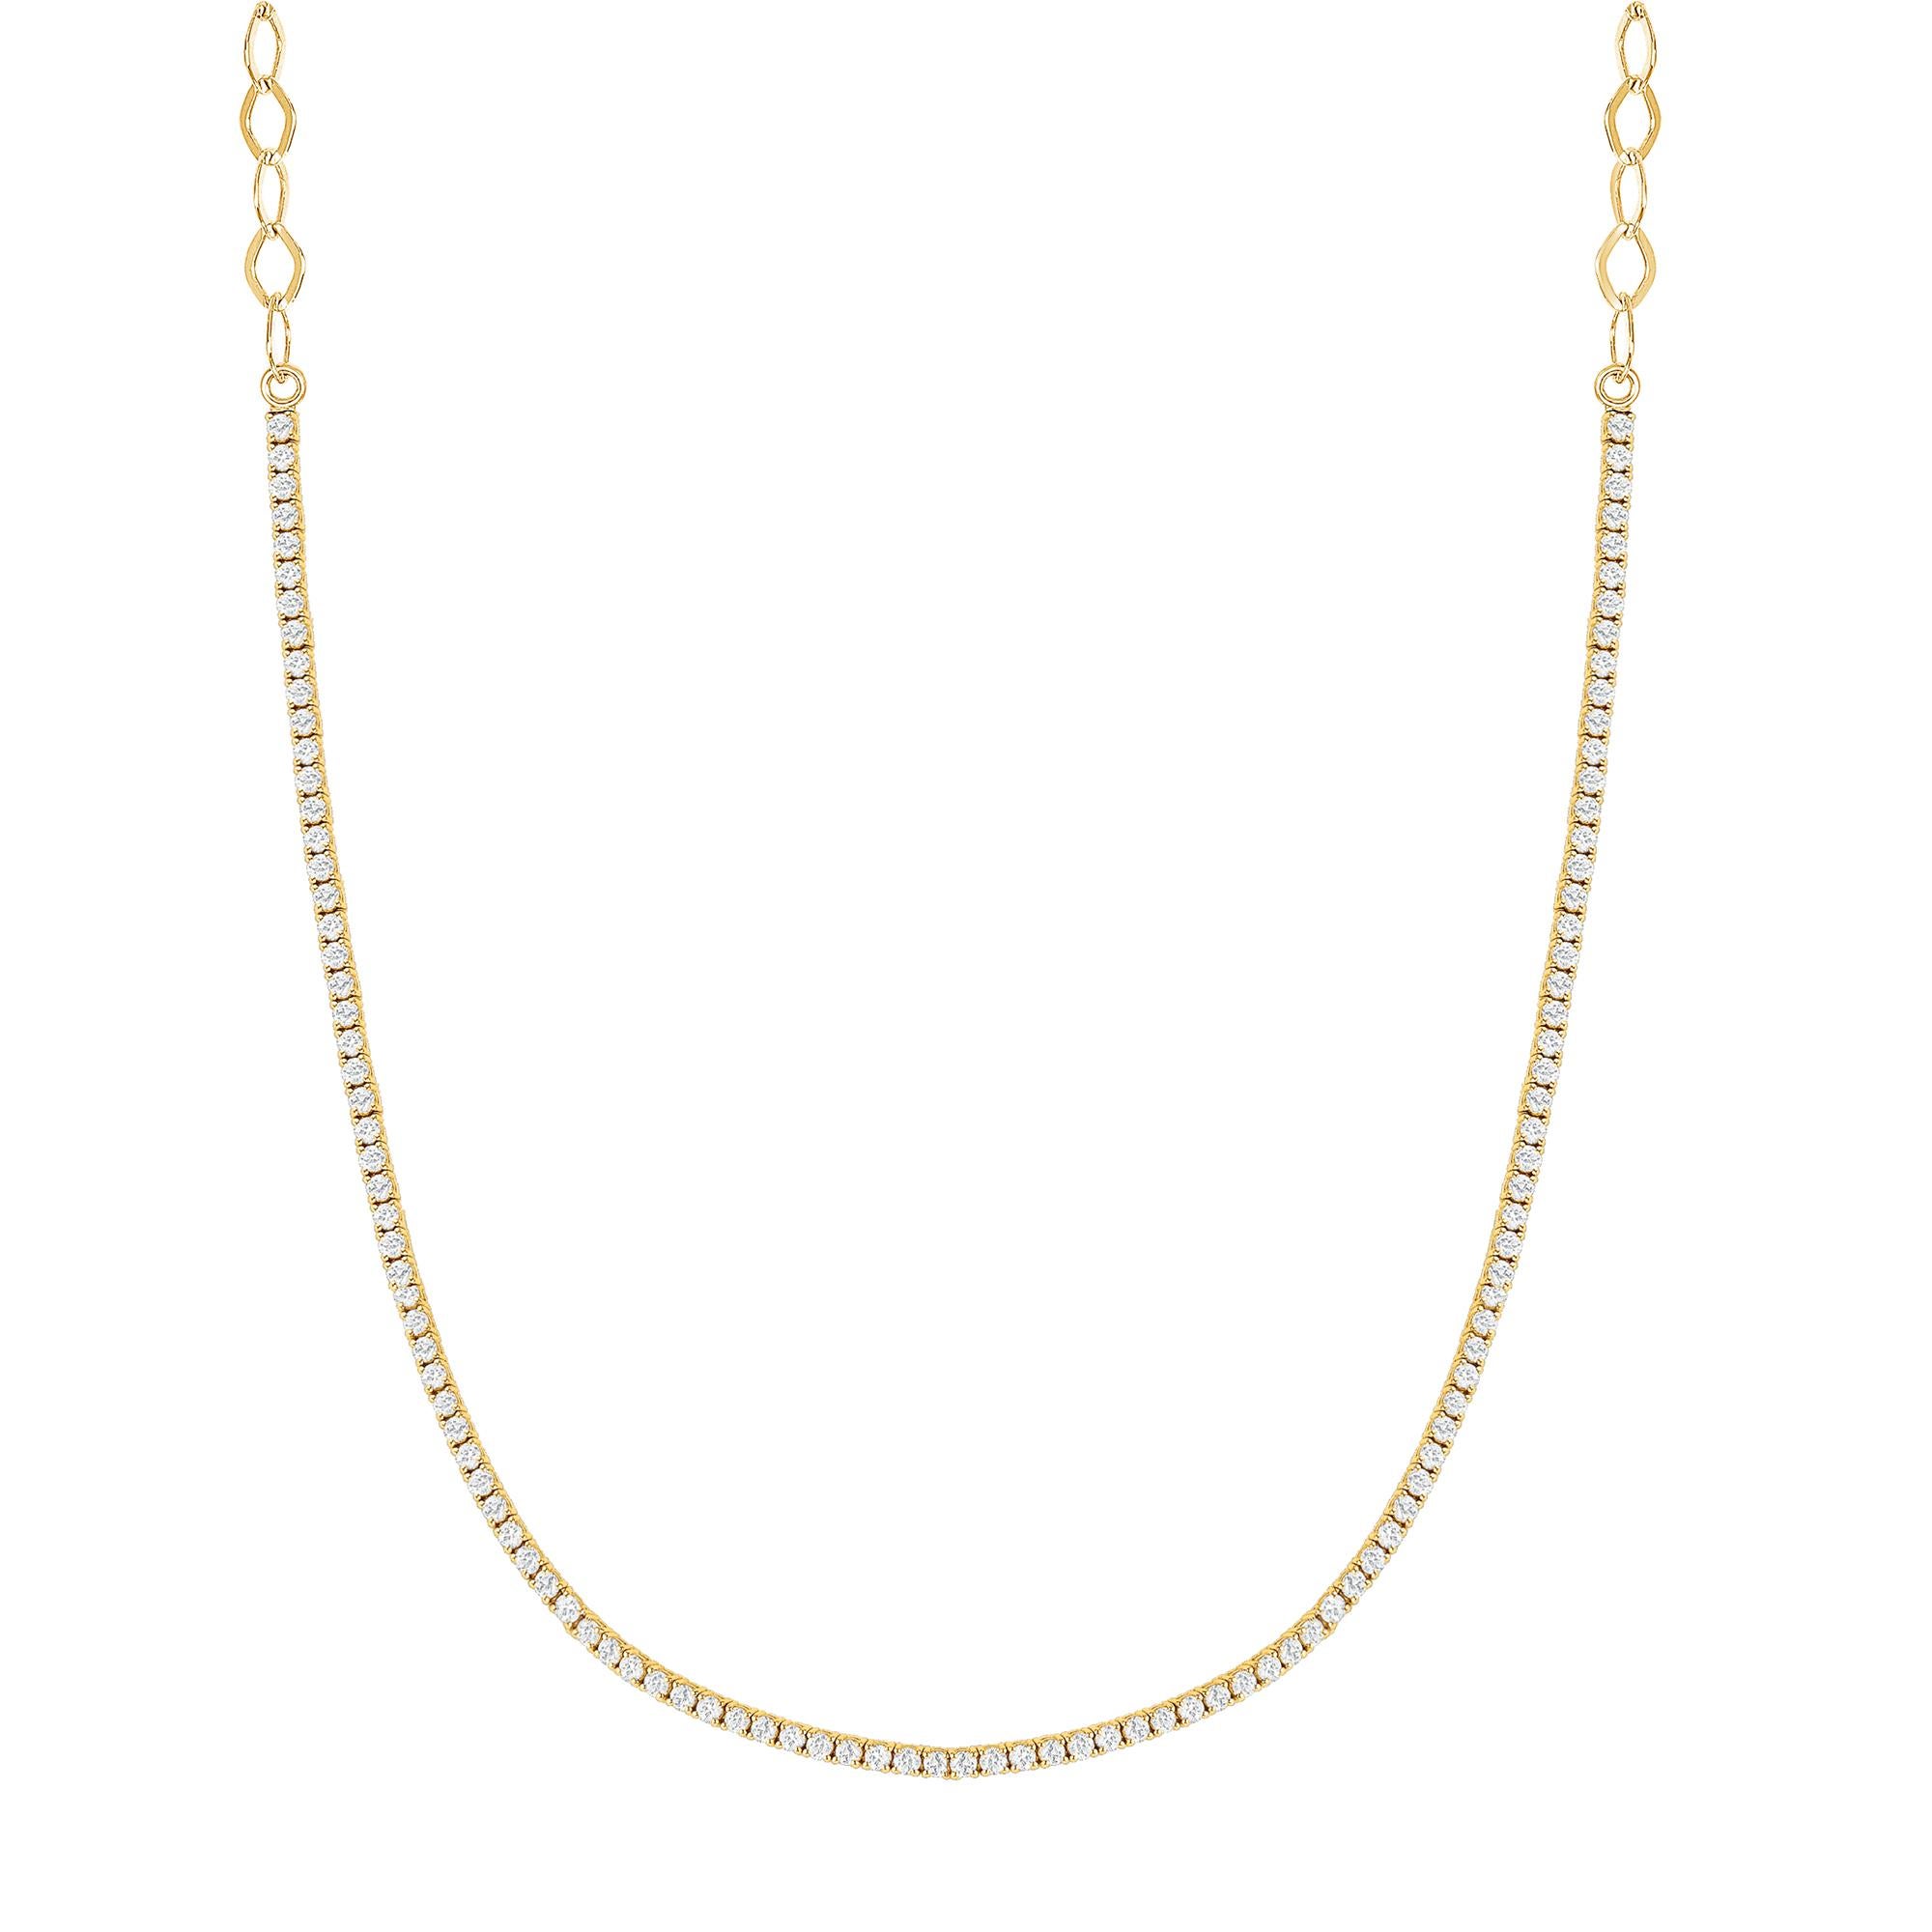 14k Gold Diamond Chain Necklace, Tennis Necklace, Choker Adjustable Necklace

Sweet and Dainty, This necklace is the perfect piece to add to your jewelry collection. Perfect for your outfit, day or night. Set with shimmering round natural diamonds.